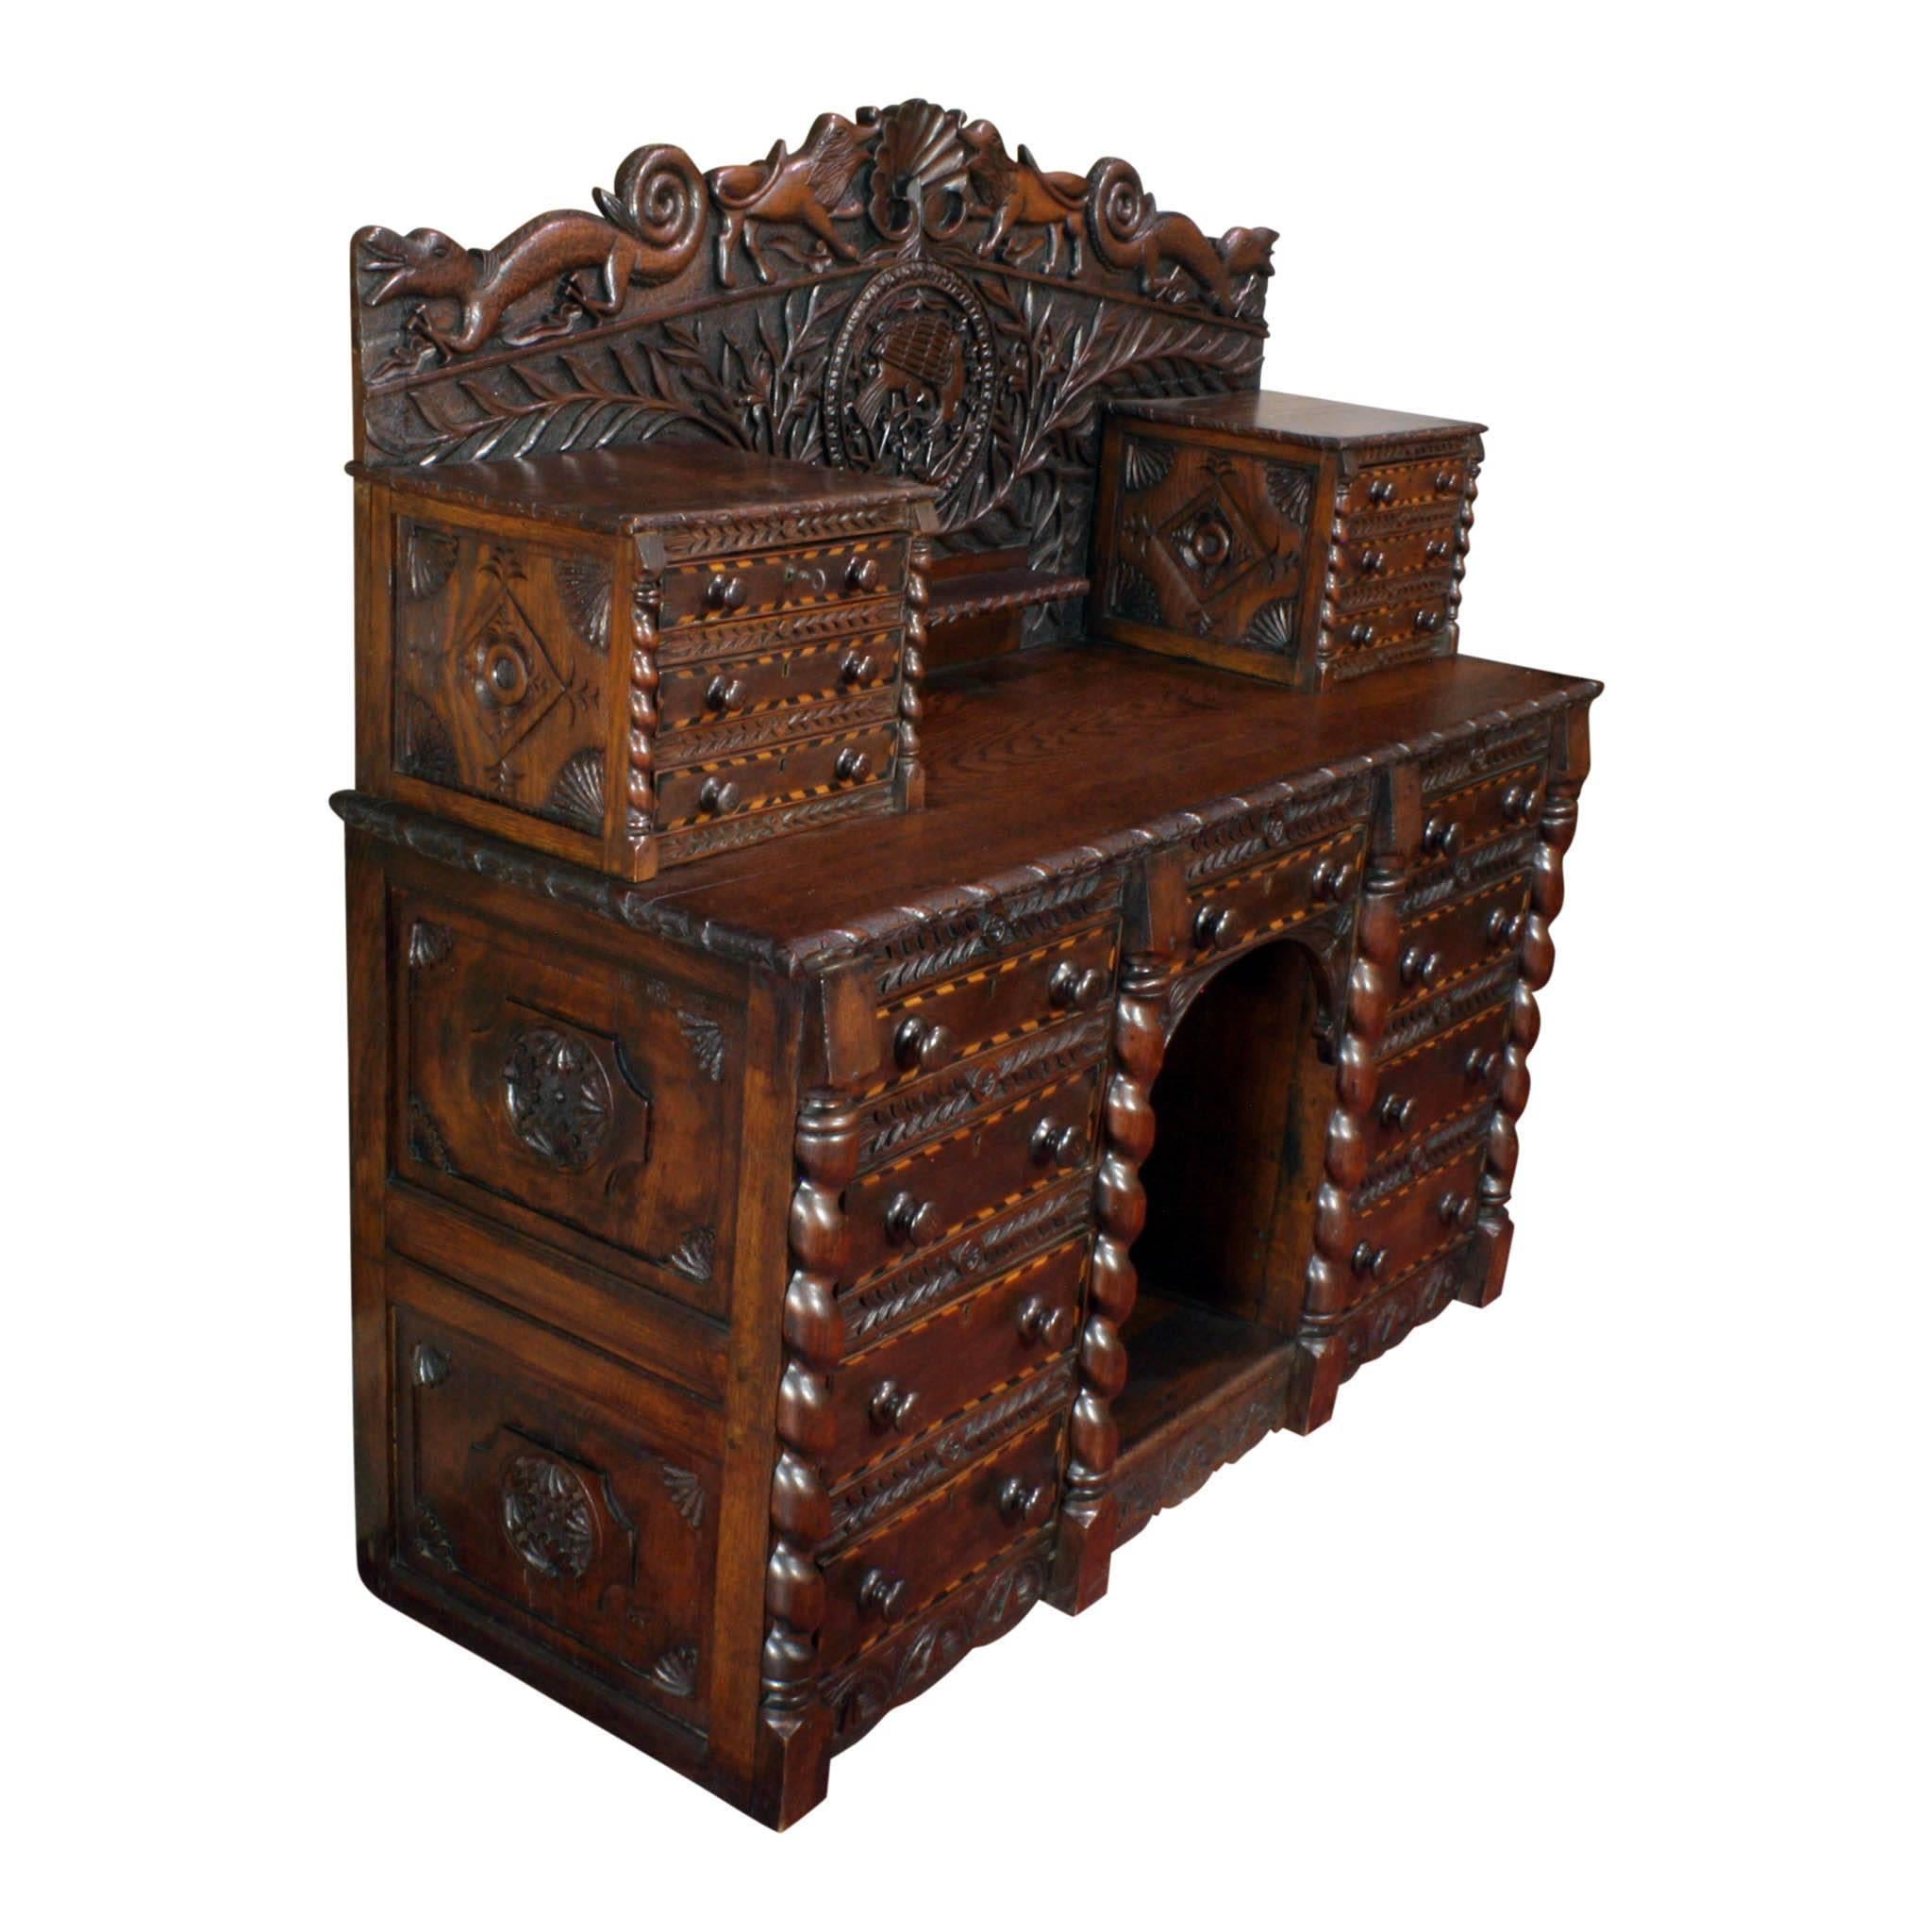 The clean lines and non-bulky carvings, lend a lighter quality to this server, that many 